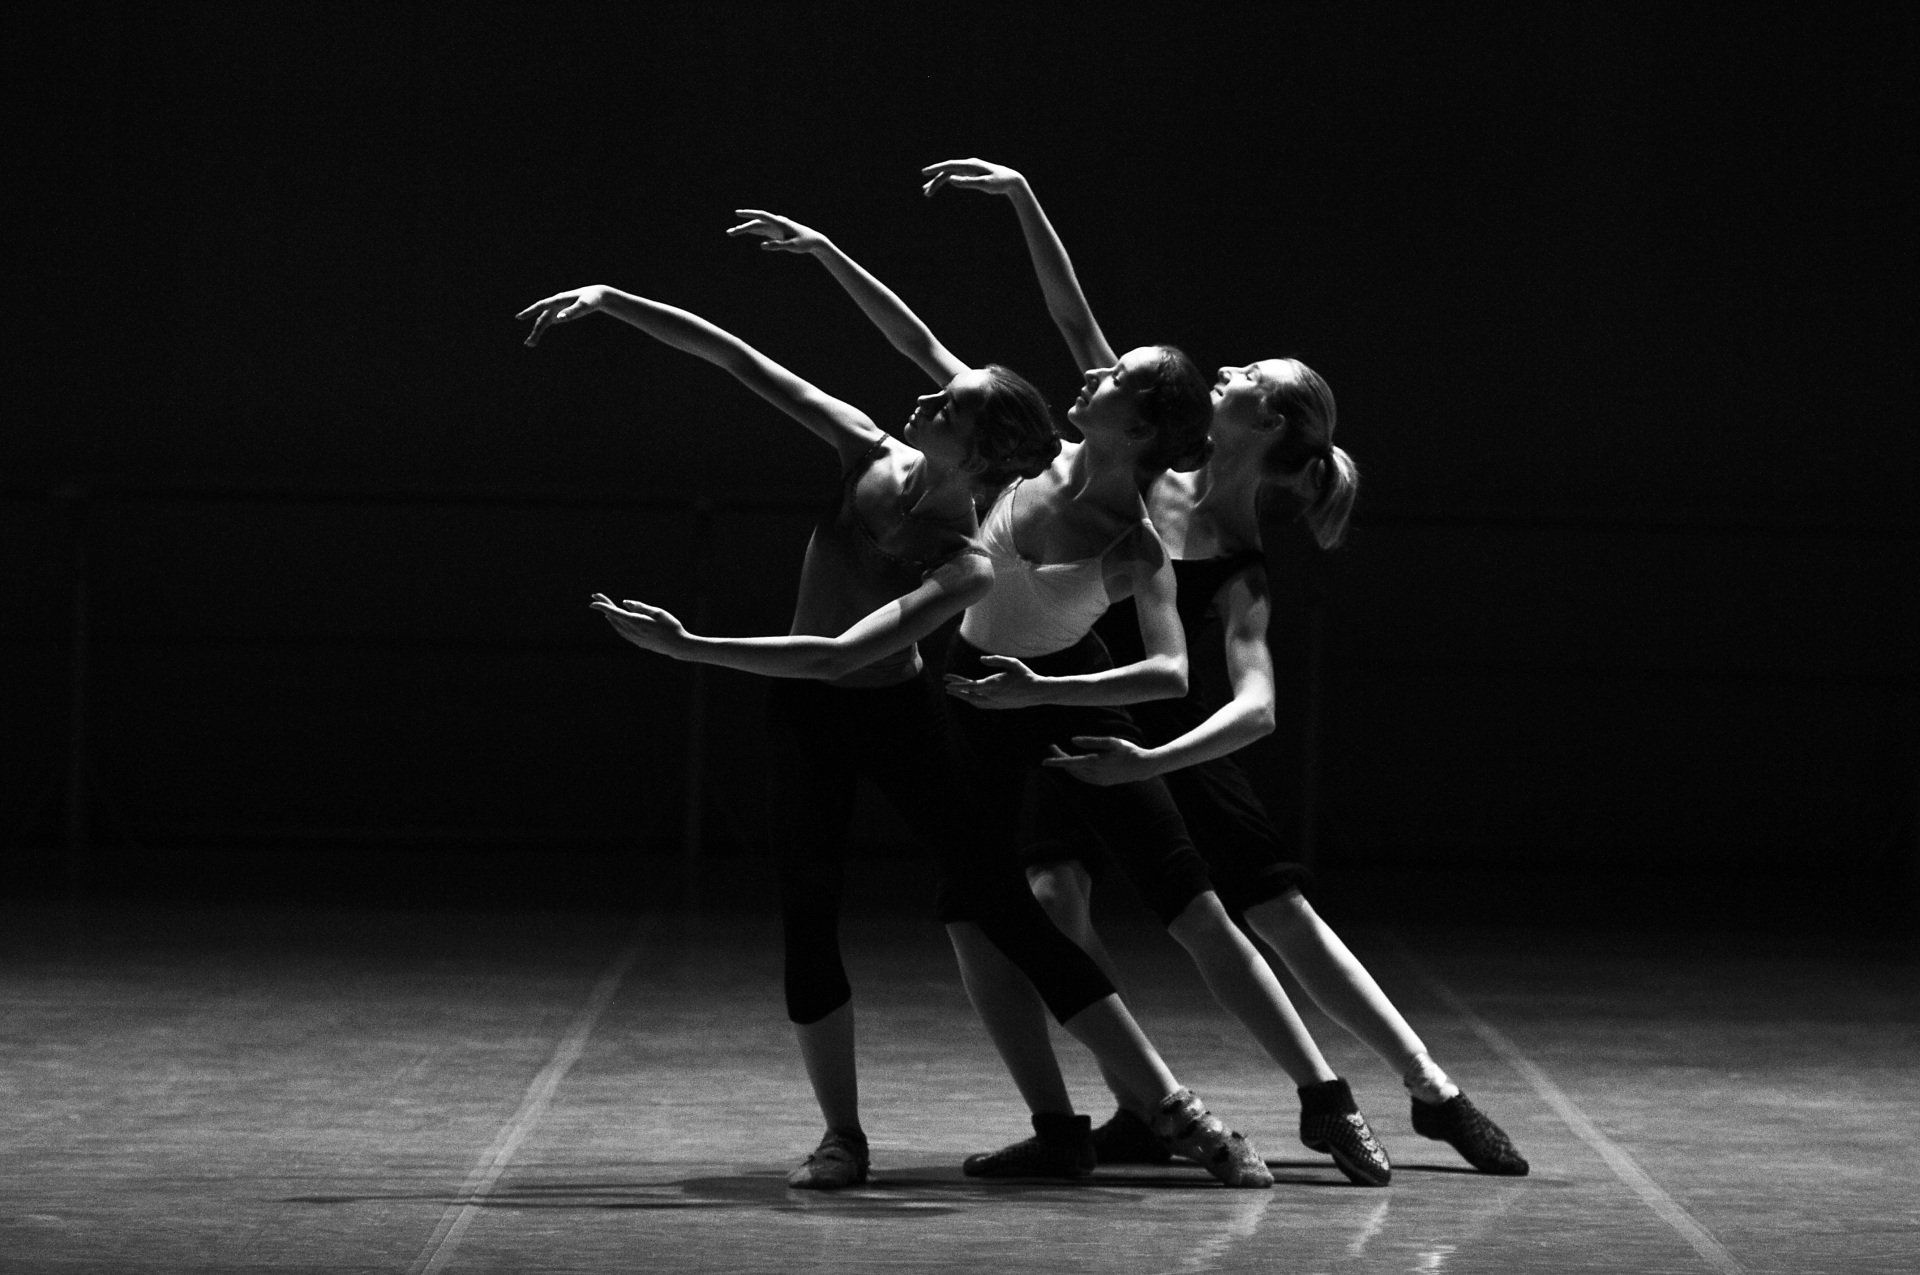 Four people with raised arms, appearing to perform a synchronized dance or group activity.